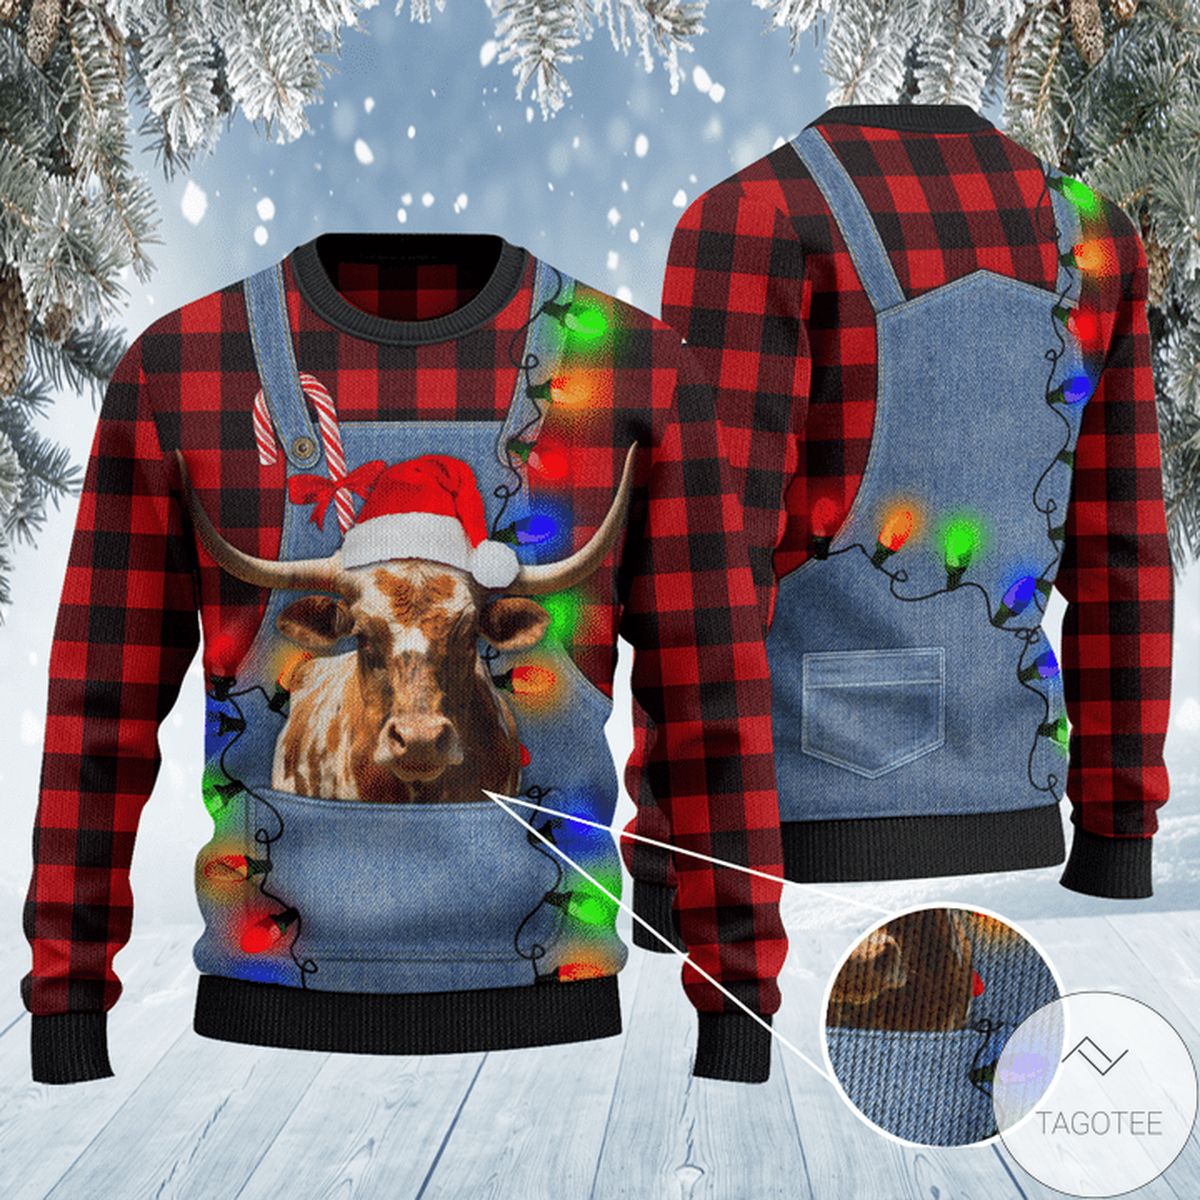 Texas Longhorn Cattle Lovers Red Plaid Shirt And Denim Bib Overalls Ugly Christmas Sweater